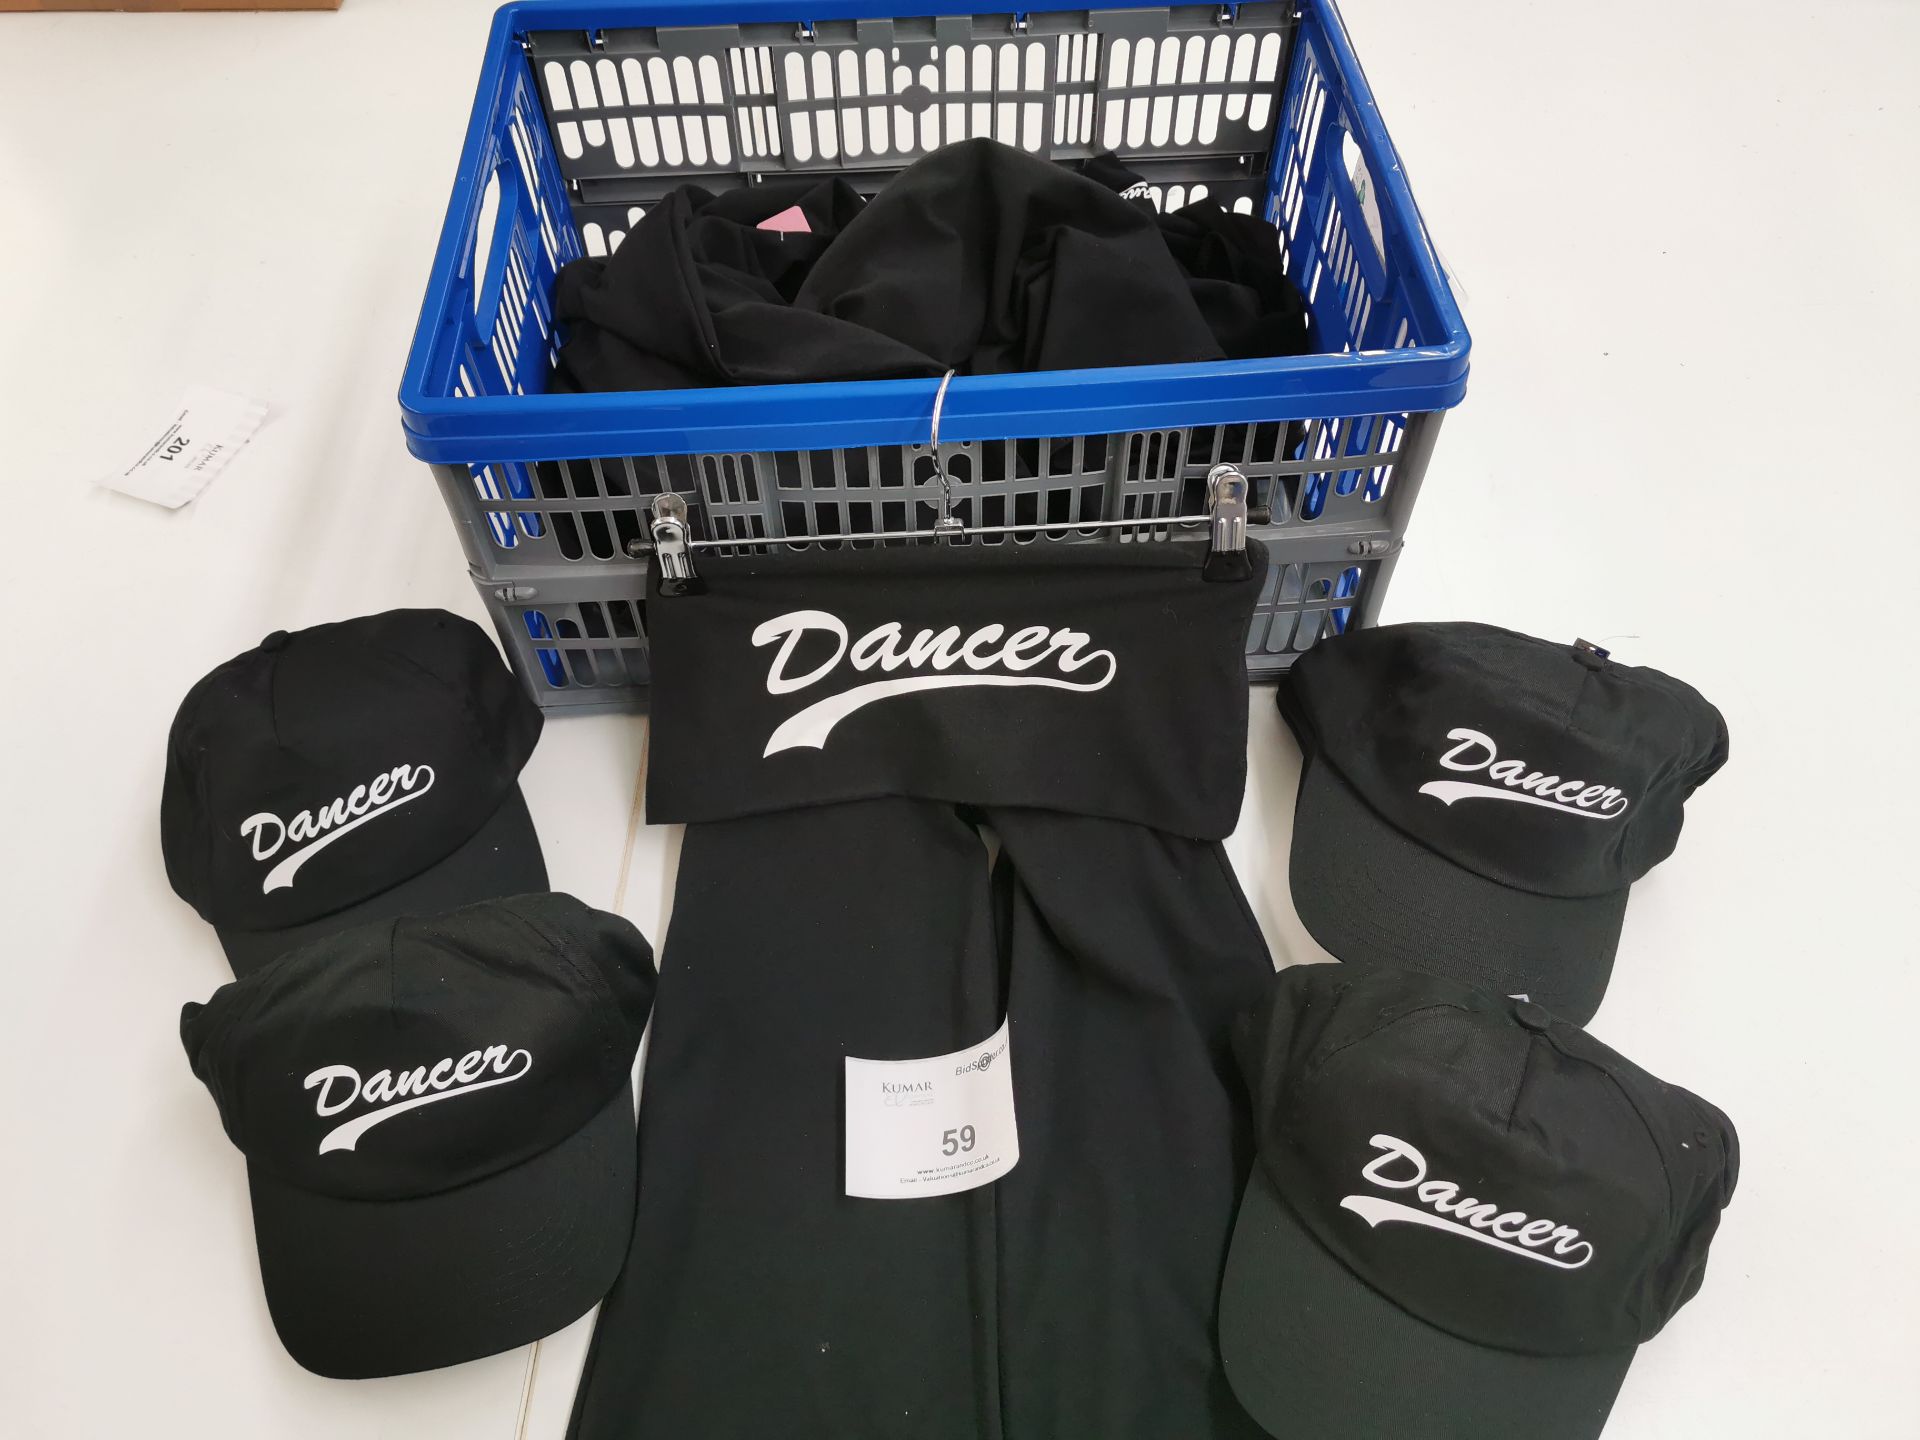 19pc Black dancer joggers (5pc) with matching black dancer caps (14pc) - Image 3 of 3